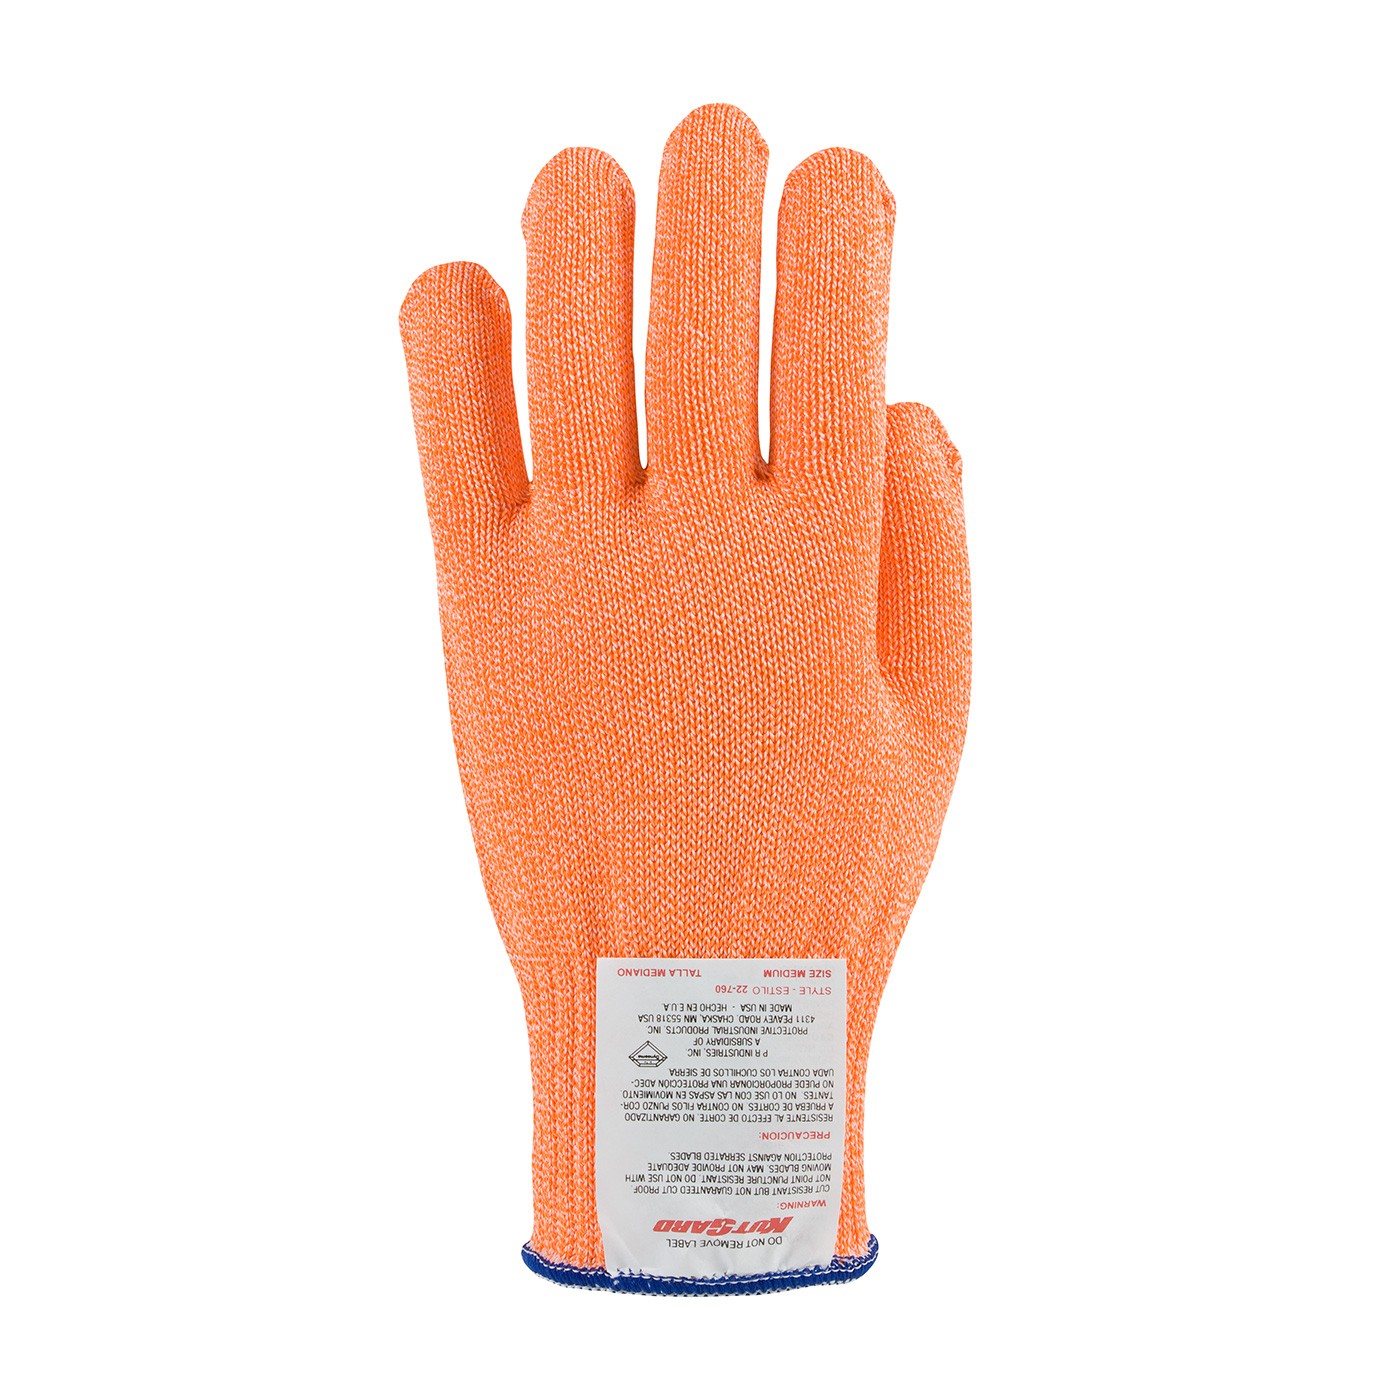 Kut Gard® Seamless Knit Dyneema® Blended Antimicrobial Glove - Medium Weight  (#22-760OR)